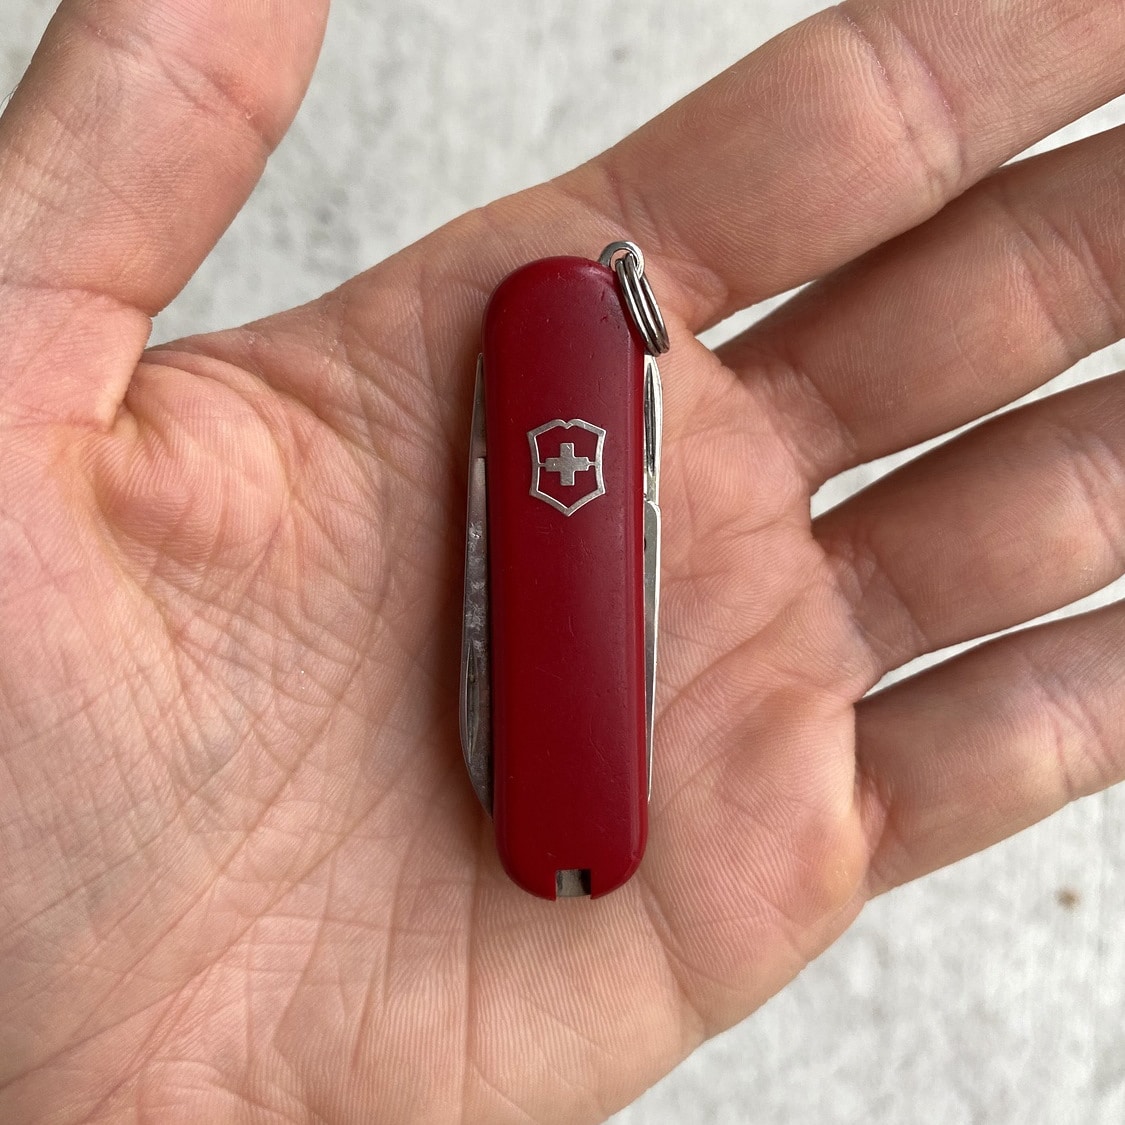 Victorinox Classic SD Swiss Army Knife Review + Rambler Comparison